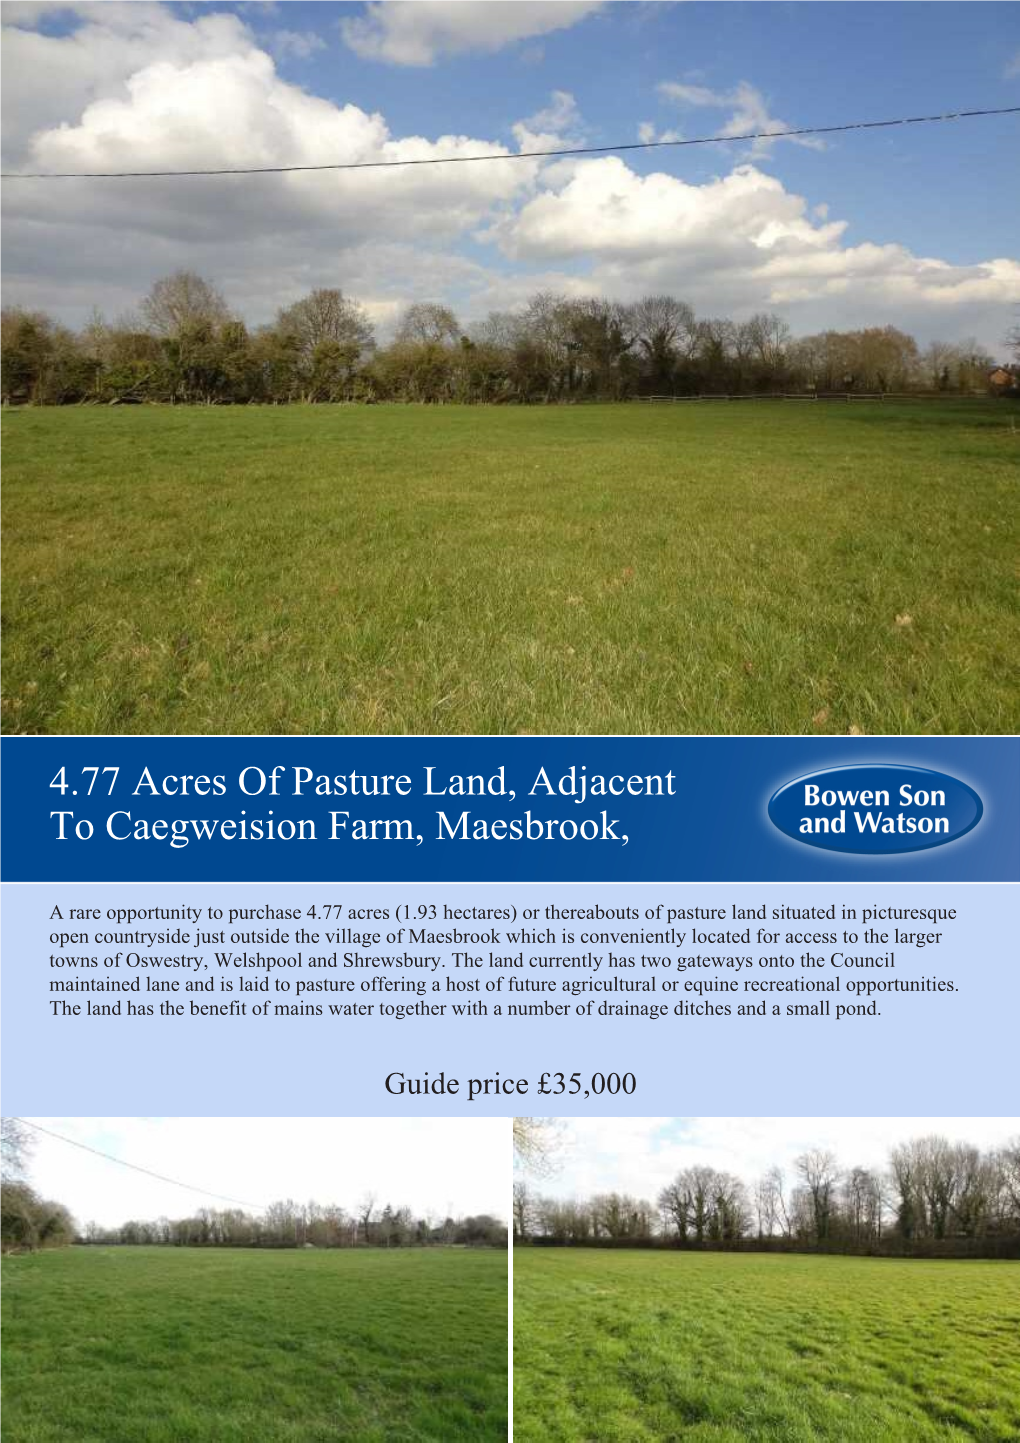 4.77 Acres of Pasture Land, Adjacent to Caegweision Farm, Maesbrook